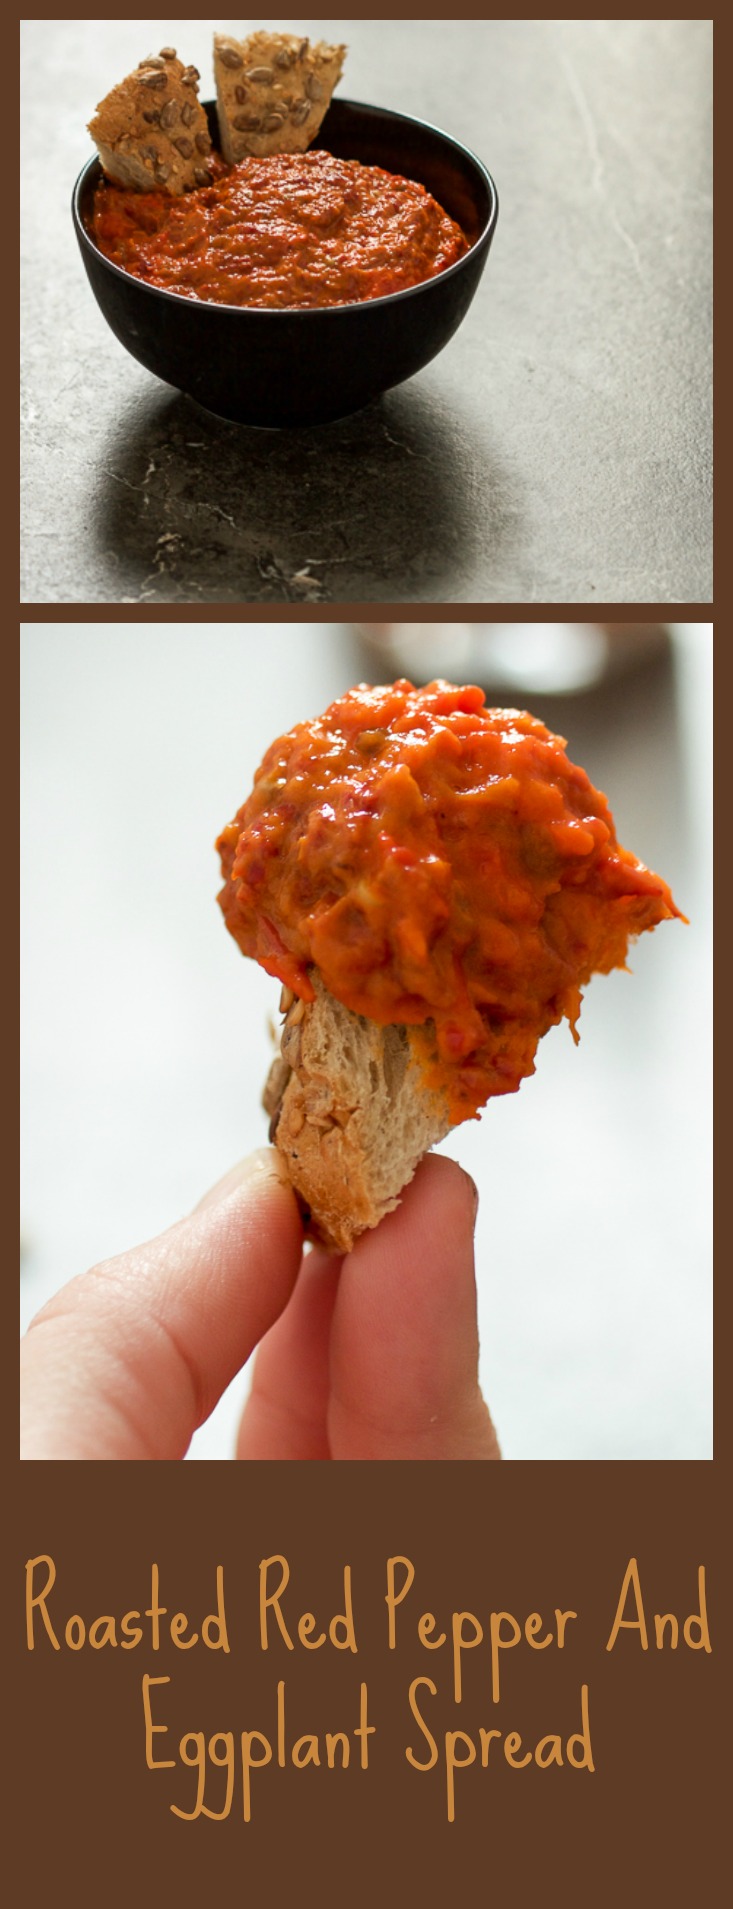 Ajvar: the world-famous Balkan roasted red pepper and eggplant relish. Smokey, deep, rich. Unforgettable.